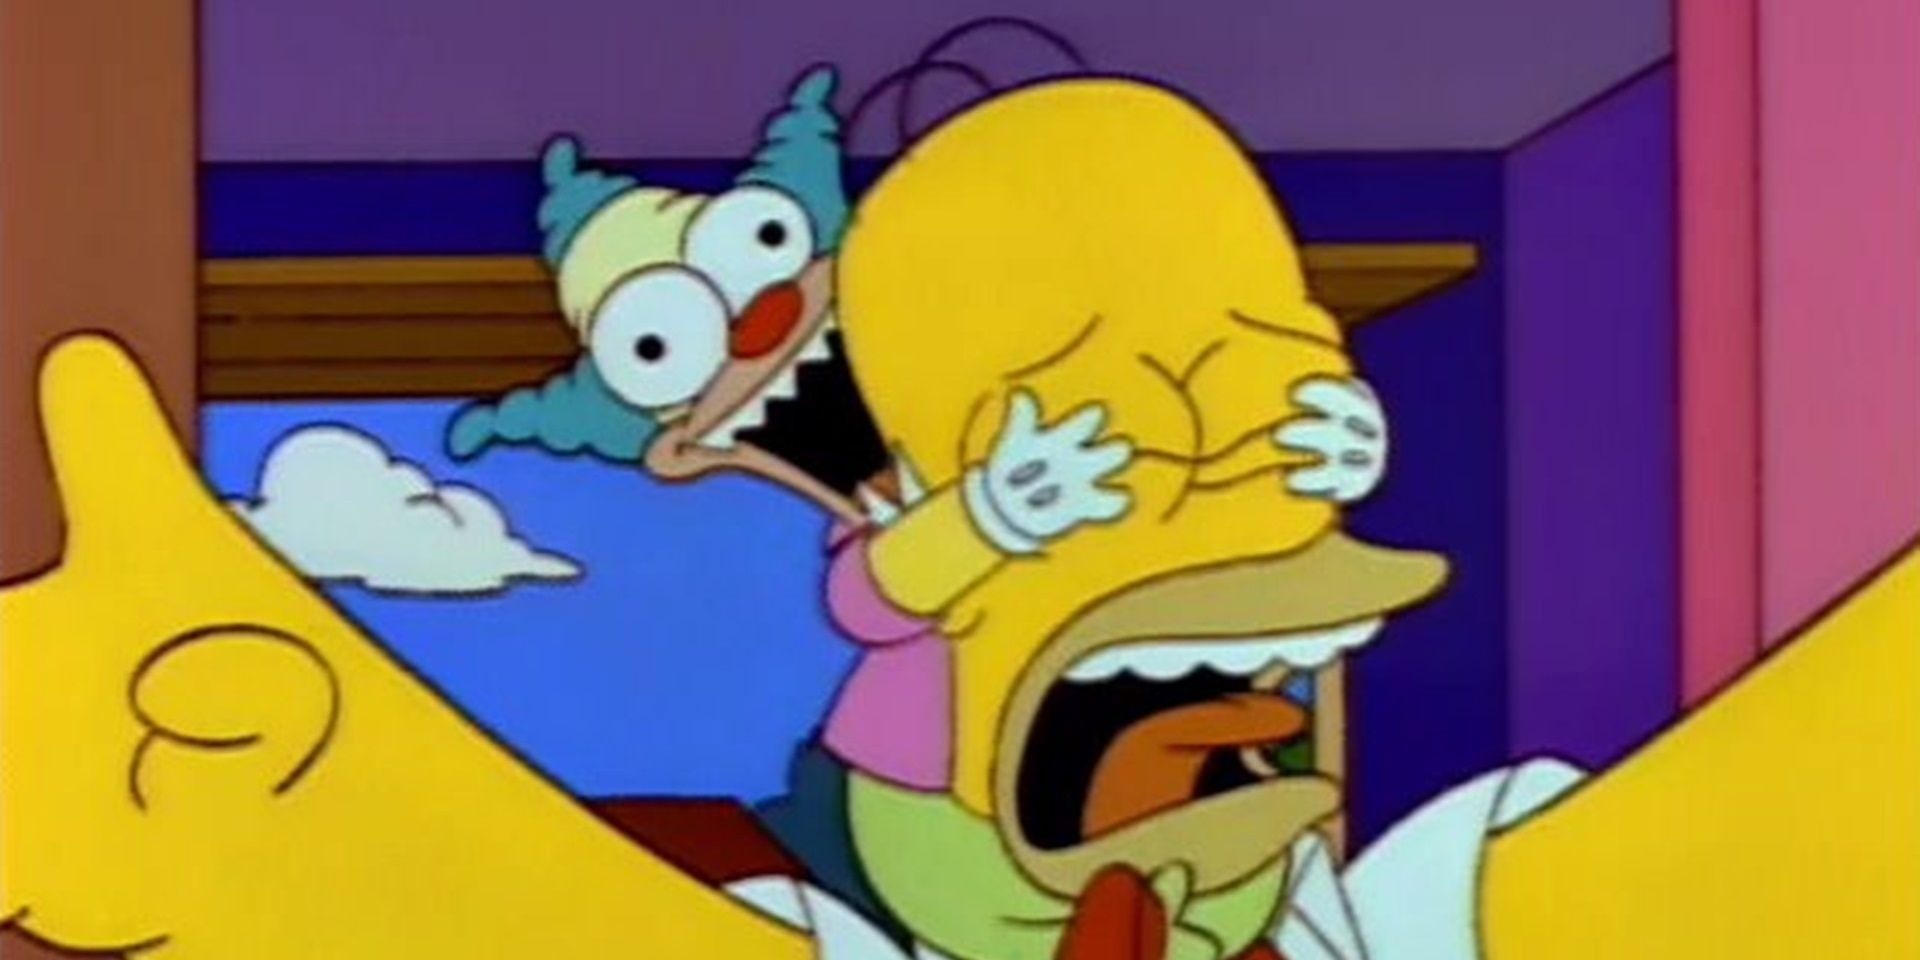 Homer is attacked by an evil Krusty doll in The Simpsons